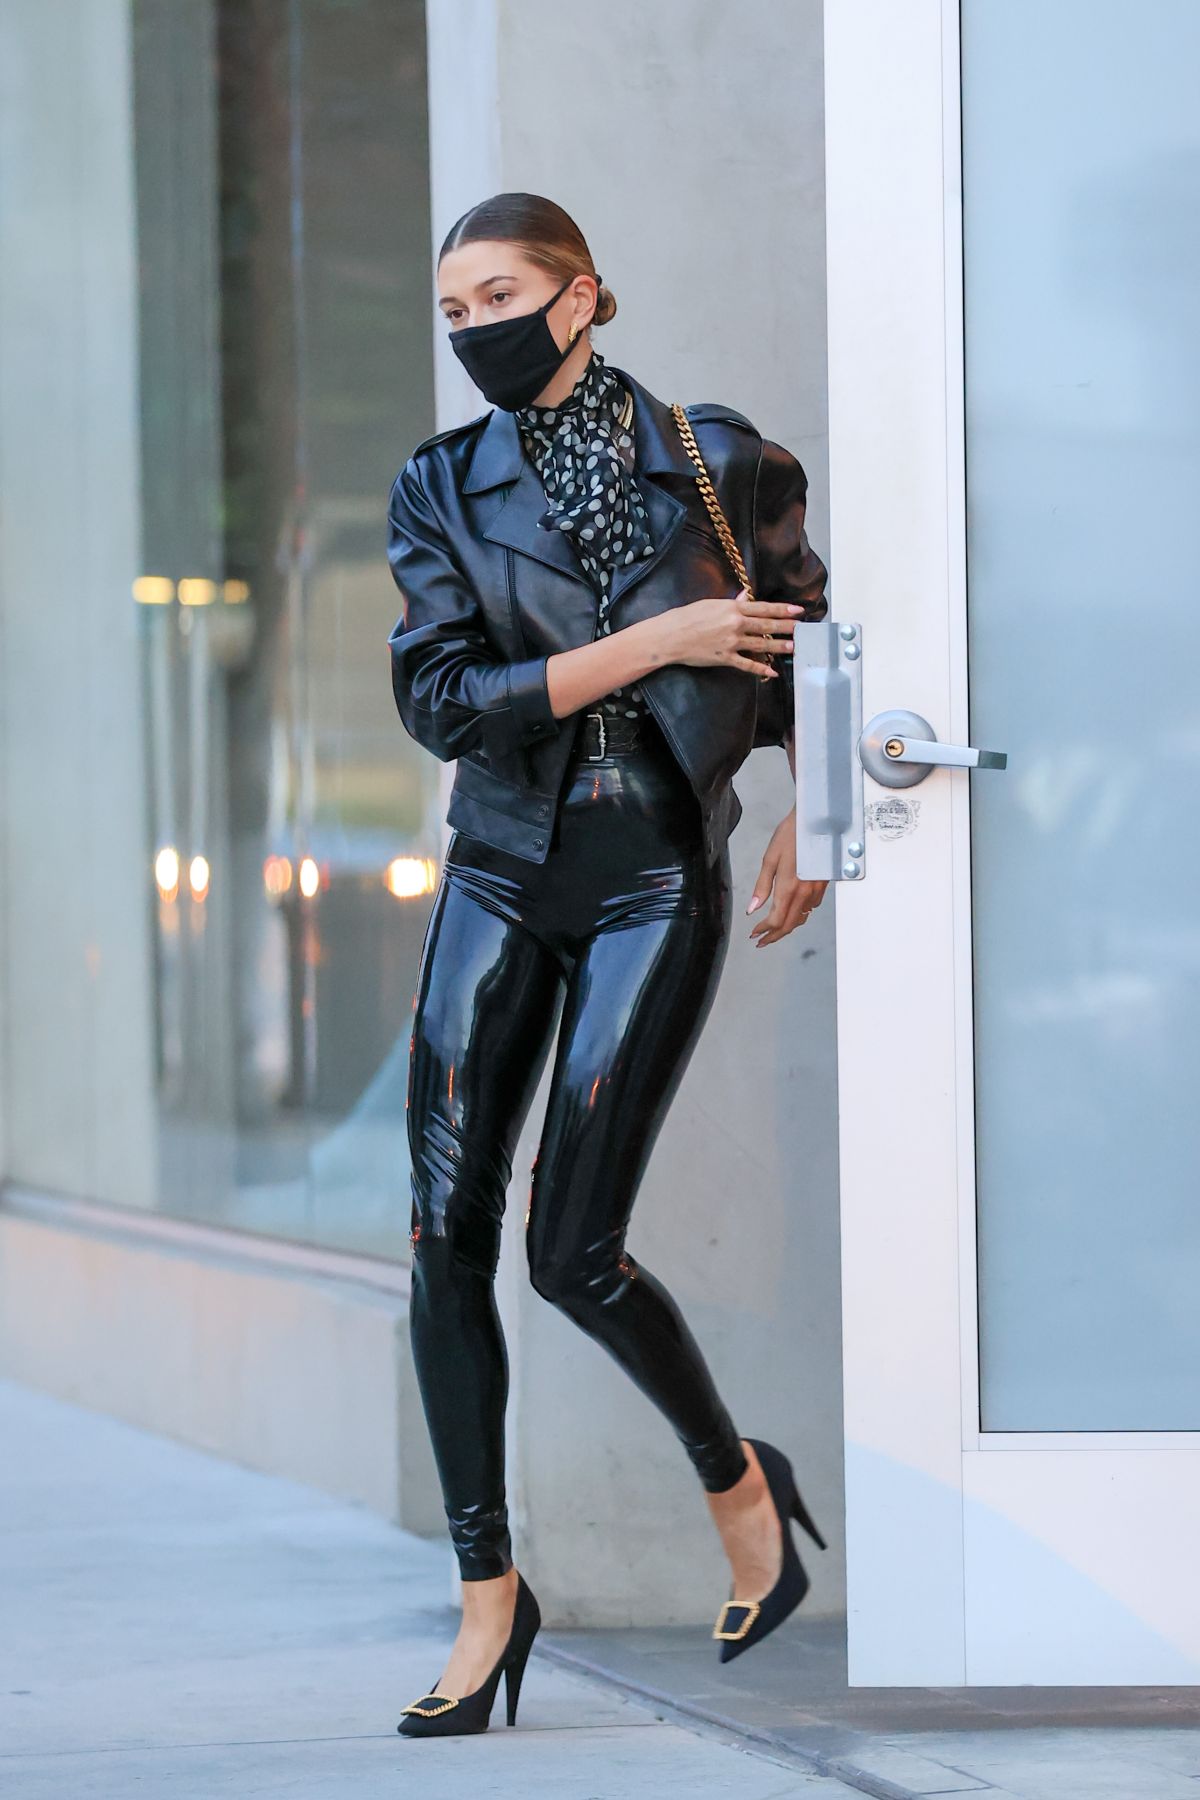 hailey-bieber-in-ysl-latex-visits-maeve-reilly-s-office-in-los-angeles-11-20-2020-2.jpg